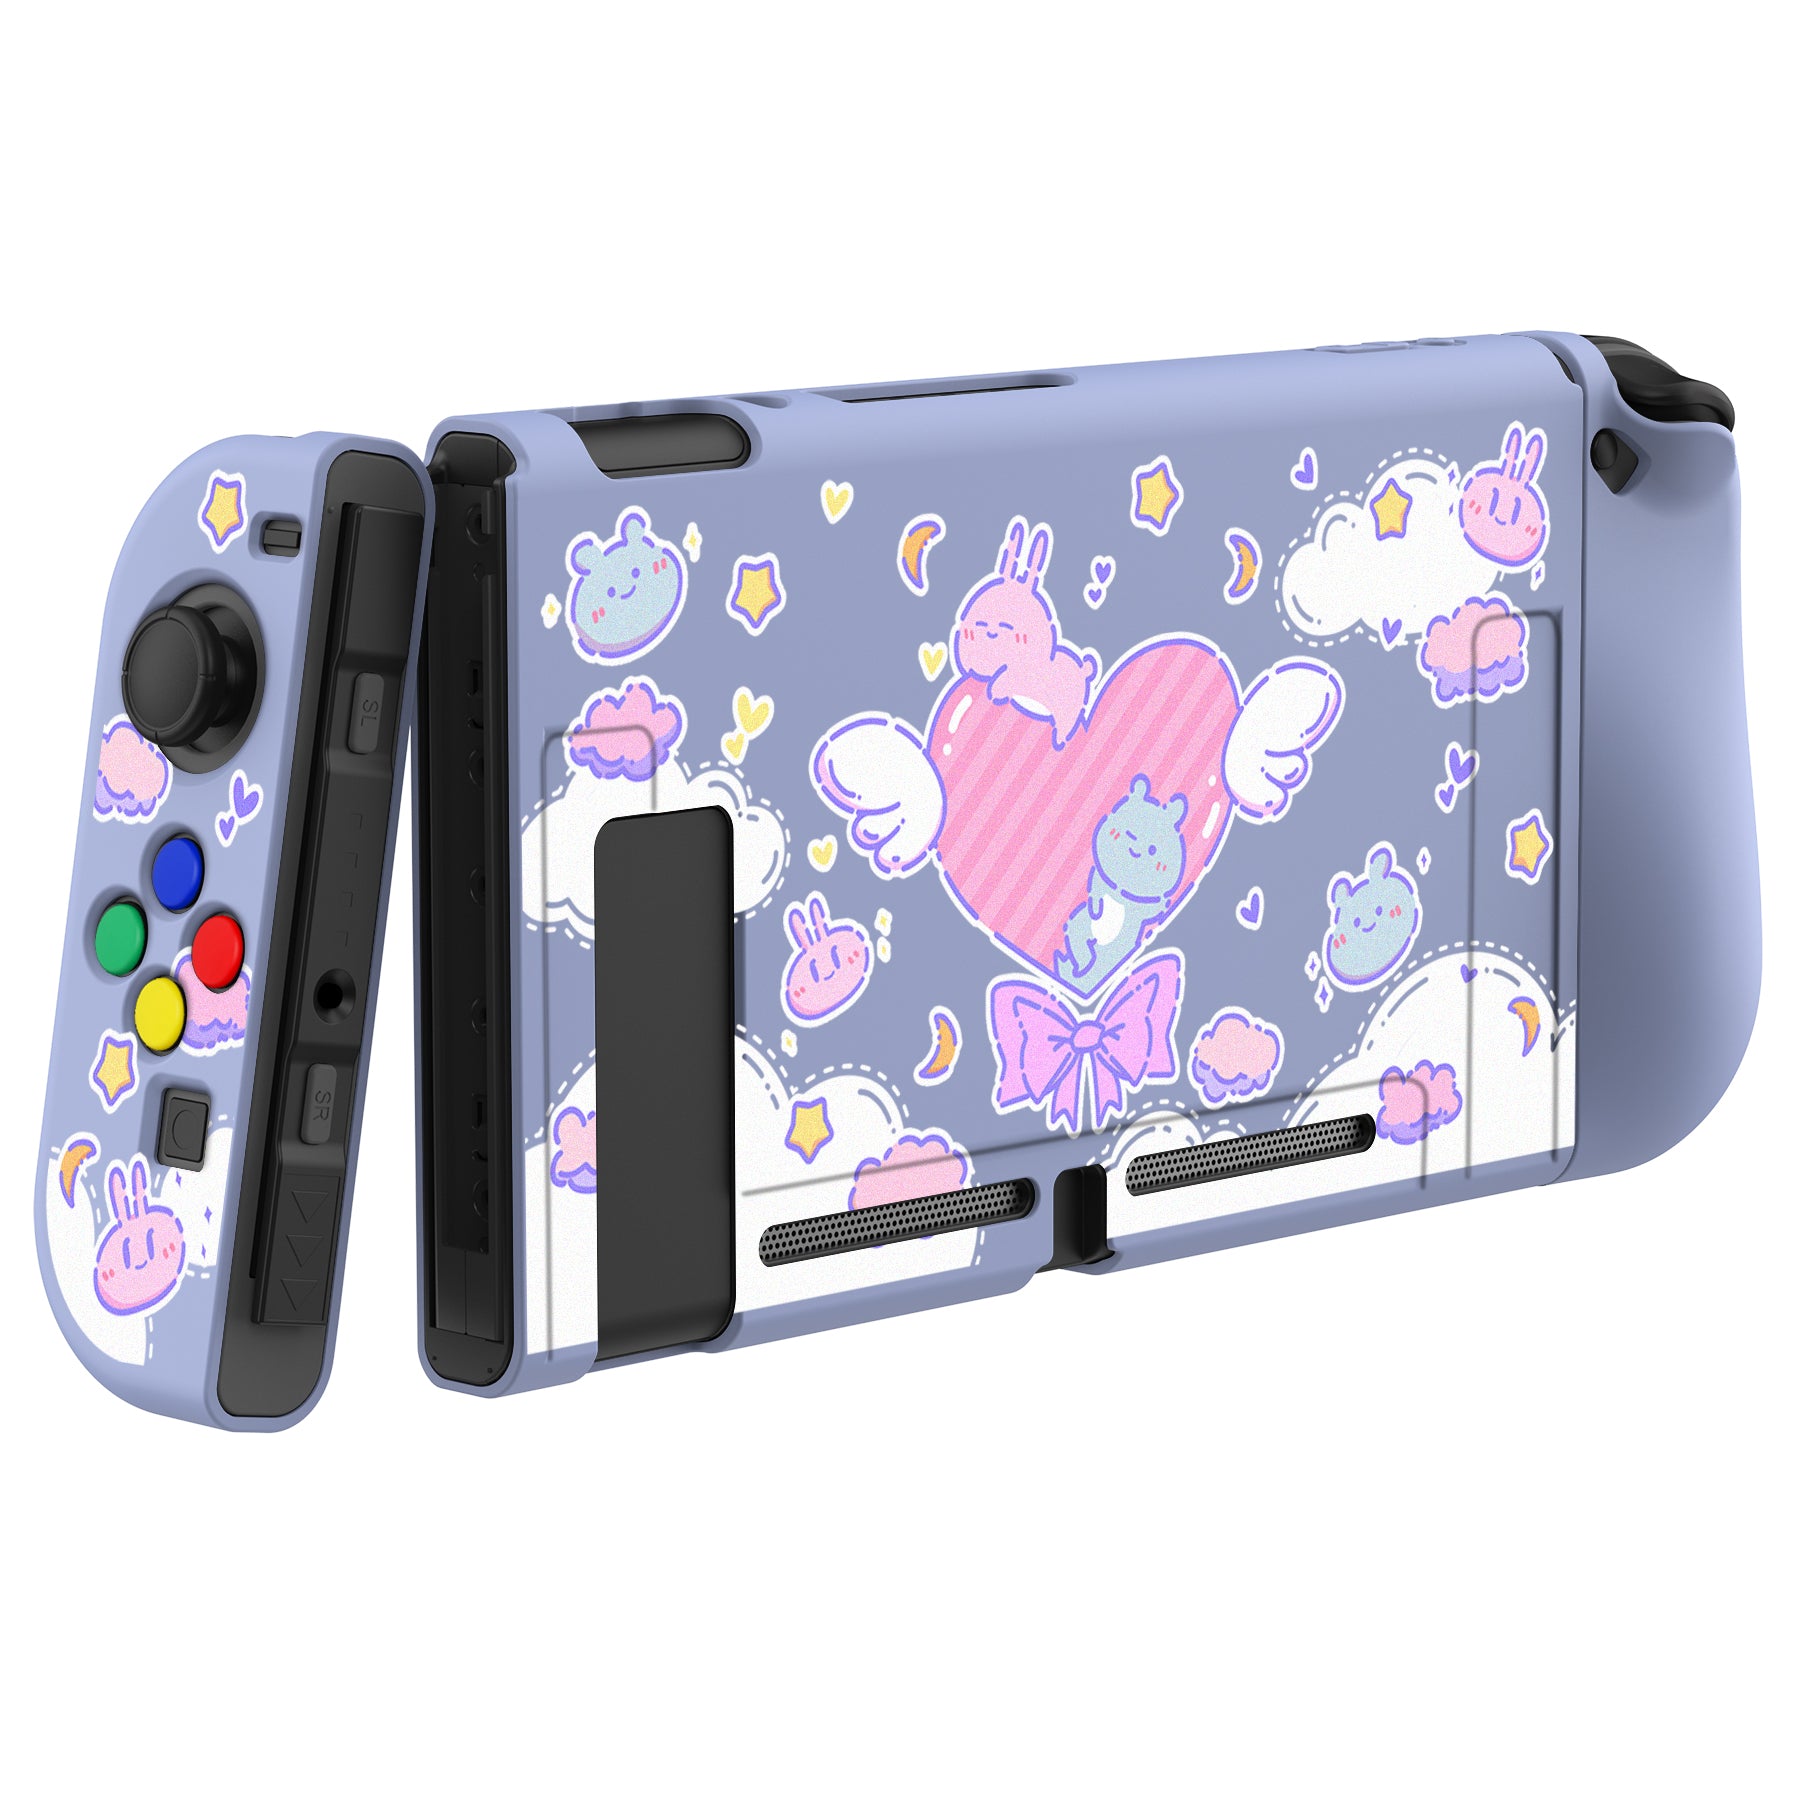 PlayVital Fantasy Bunny & Bear Protective Case for NS, Soft TPU Slim Case Cover for NS Joycon Console with Colorful ABXY Direction Button Caps - NTU6024G2 PlayVital